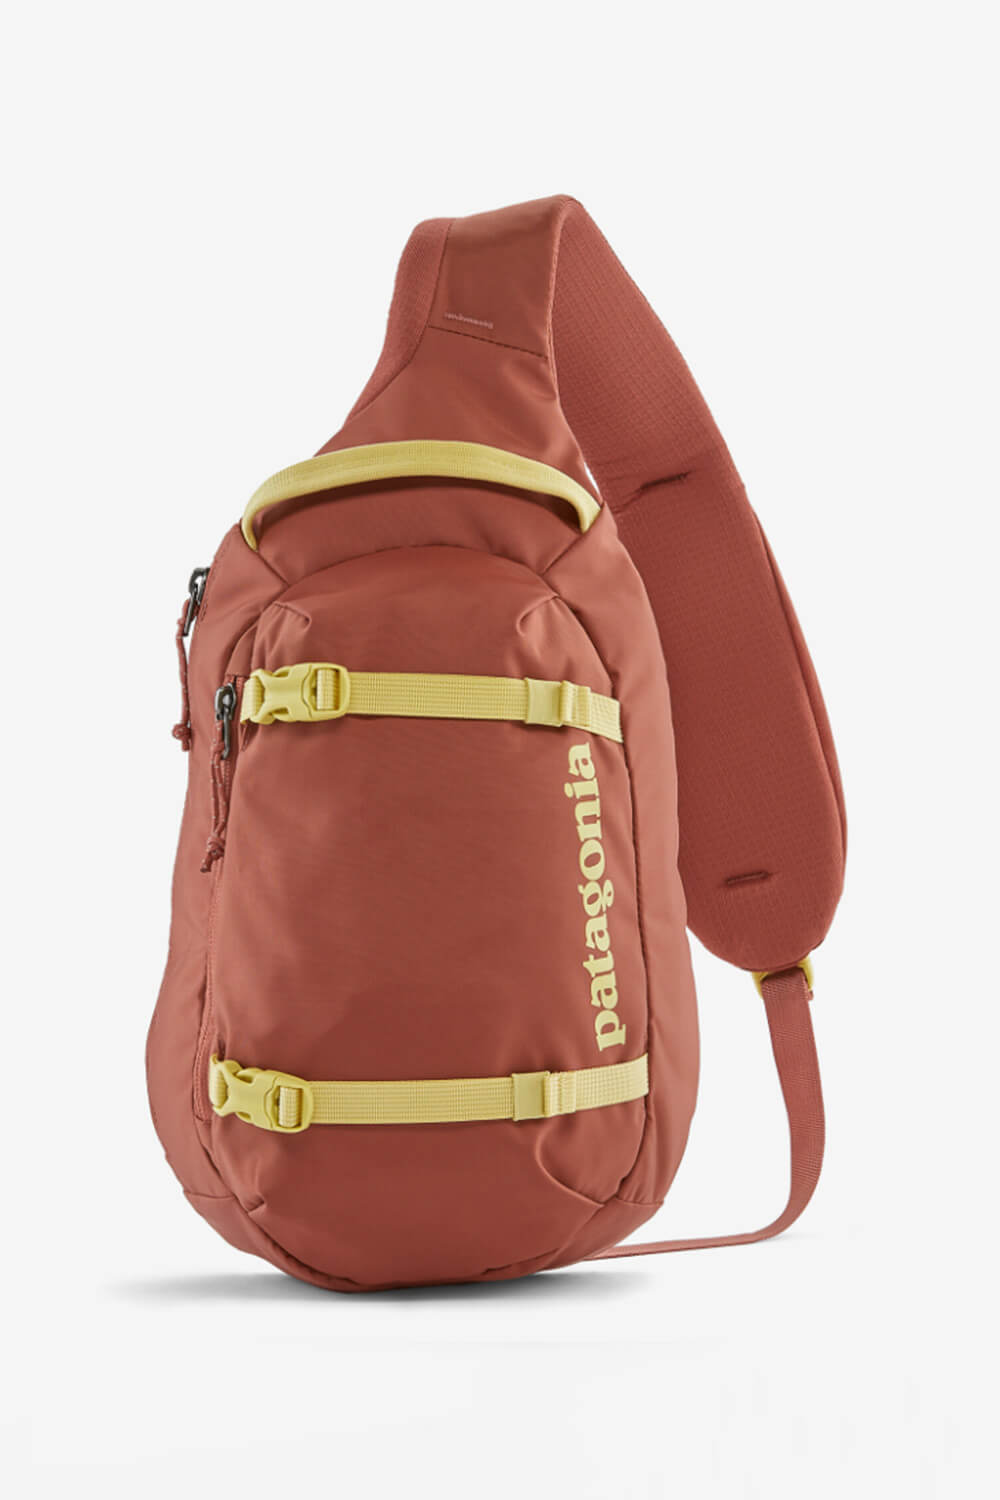 This Patagonia Sling Bag Is Perfect for Day Hikes